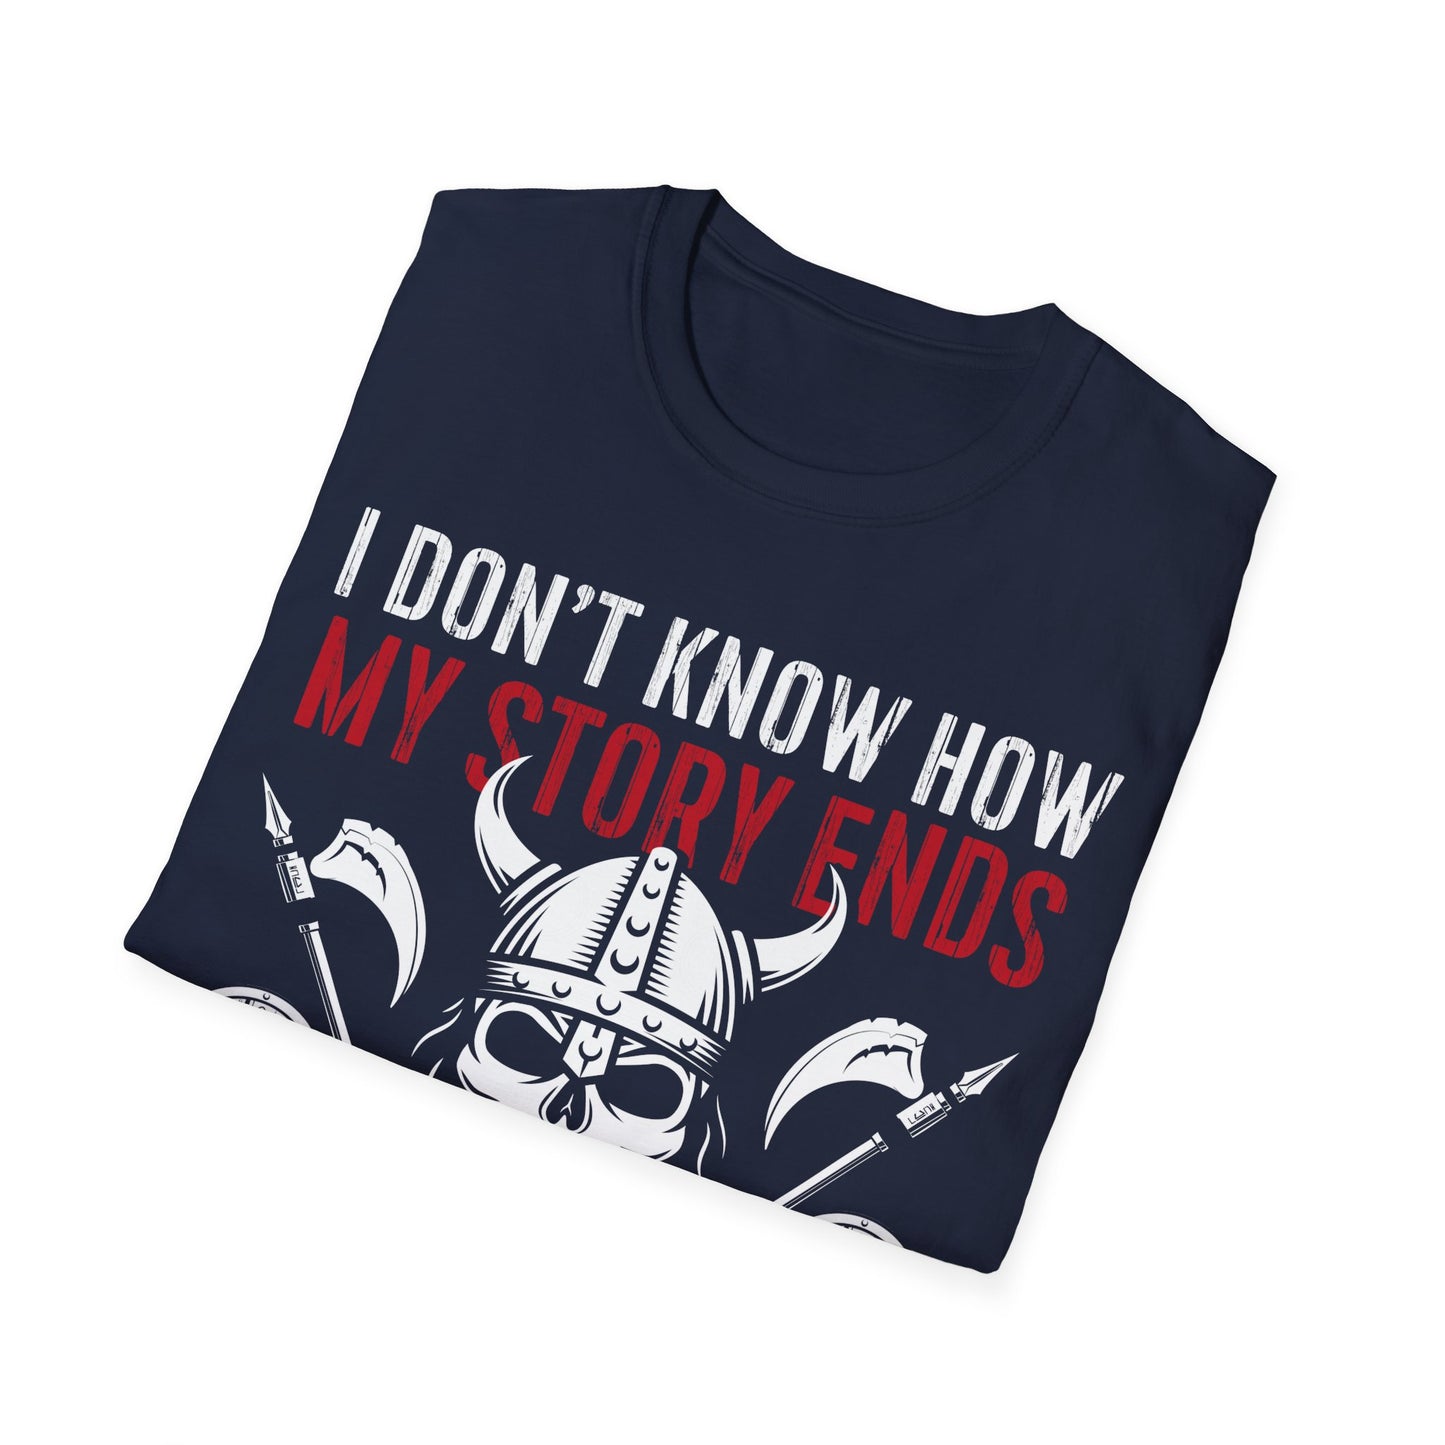 I Do Not Know How My Story Ends But It Will Never Say I Gave Up Viking T-Shirt